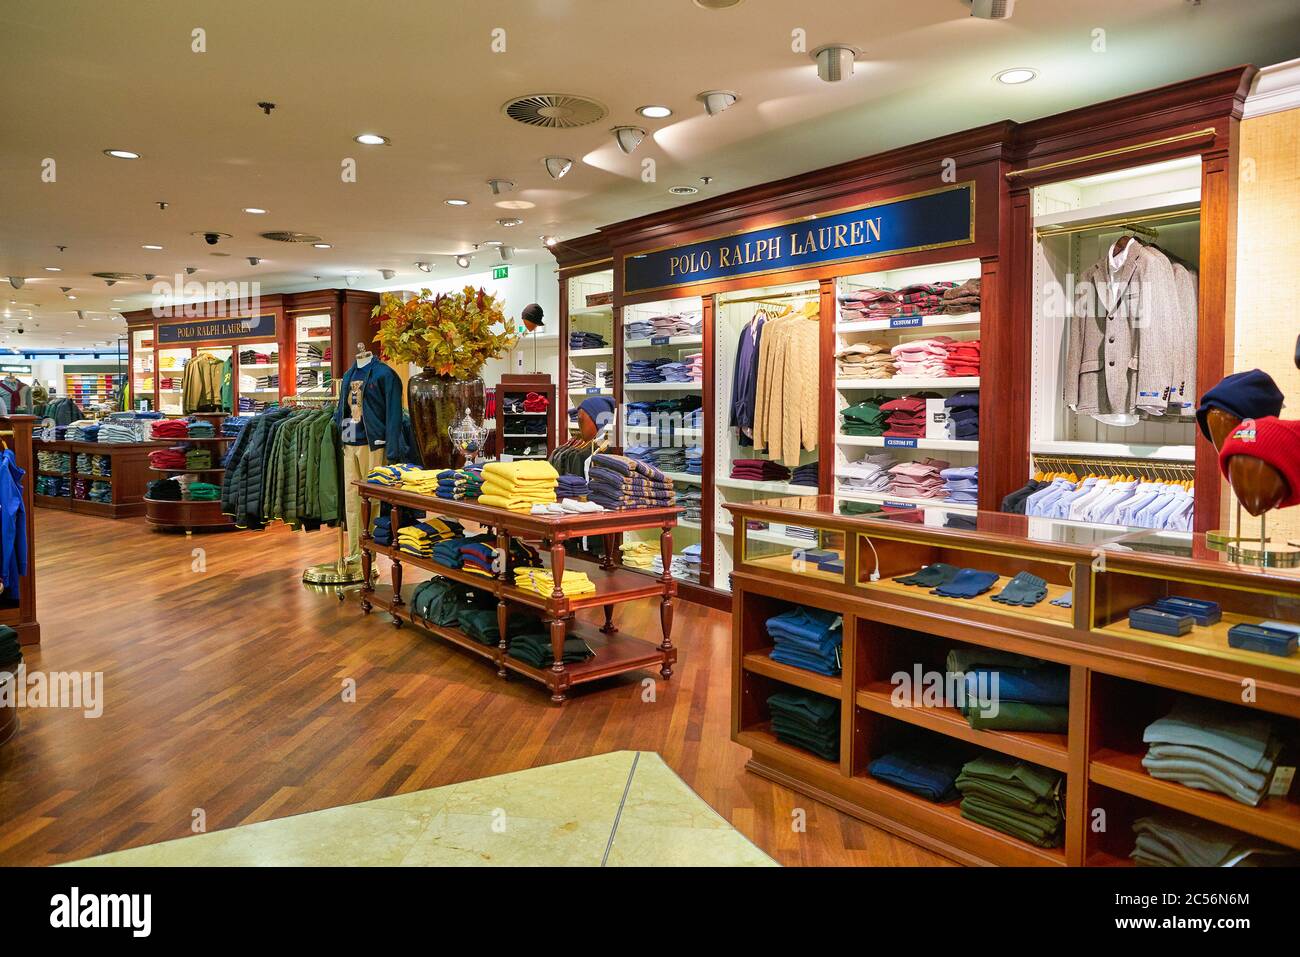 Polo Ralph Lauren Outlet Inside Interior Clothing Apparel High Resolution  Stock Photography and Images - Alamy